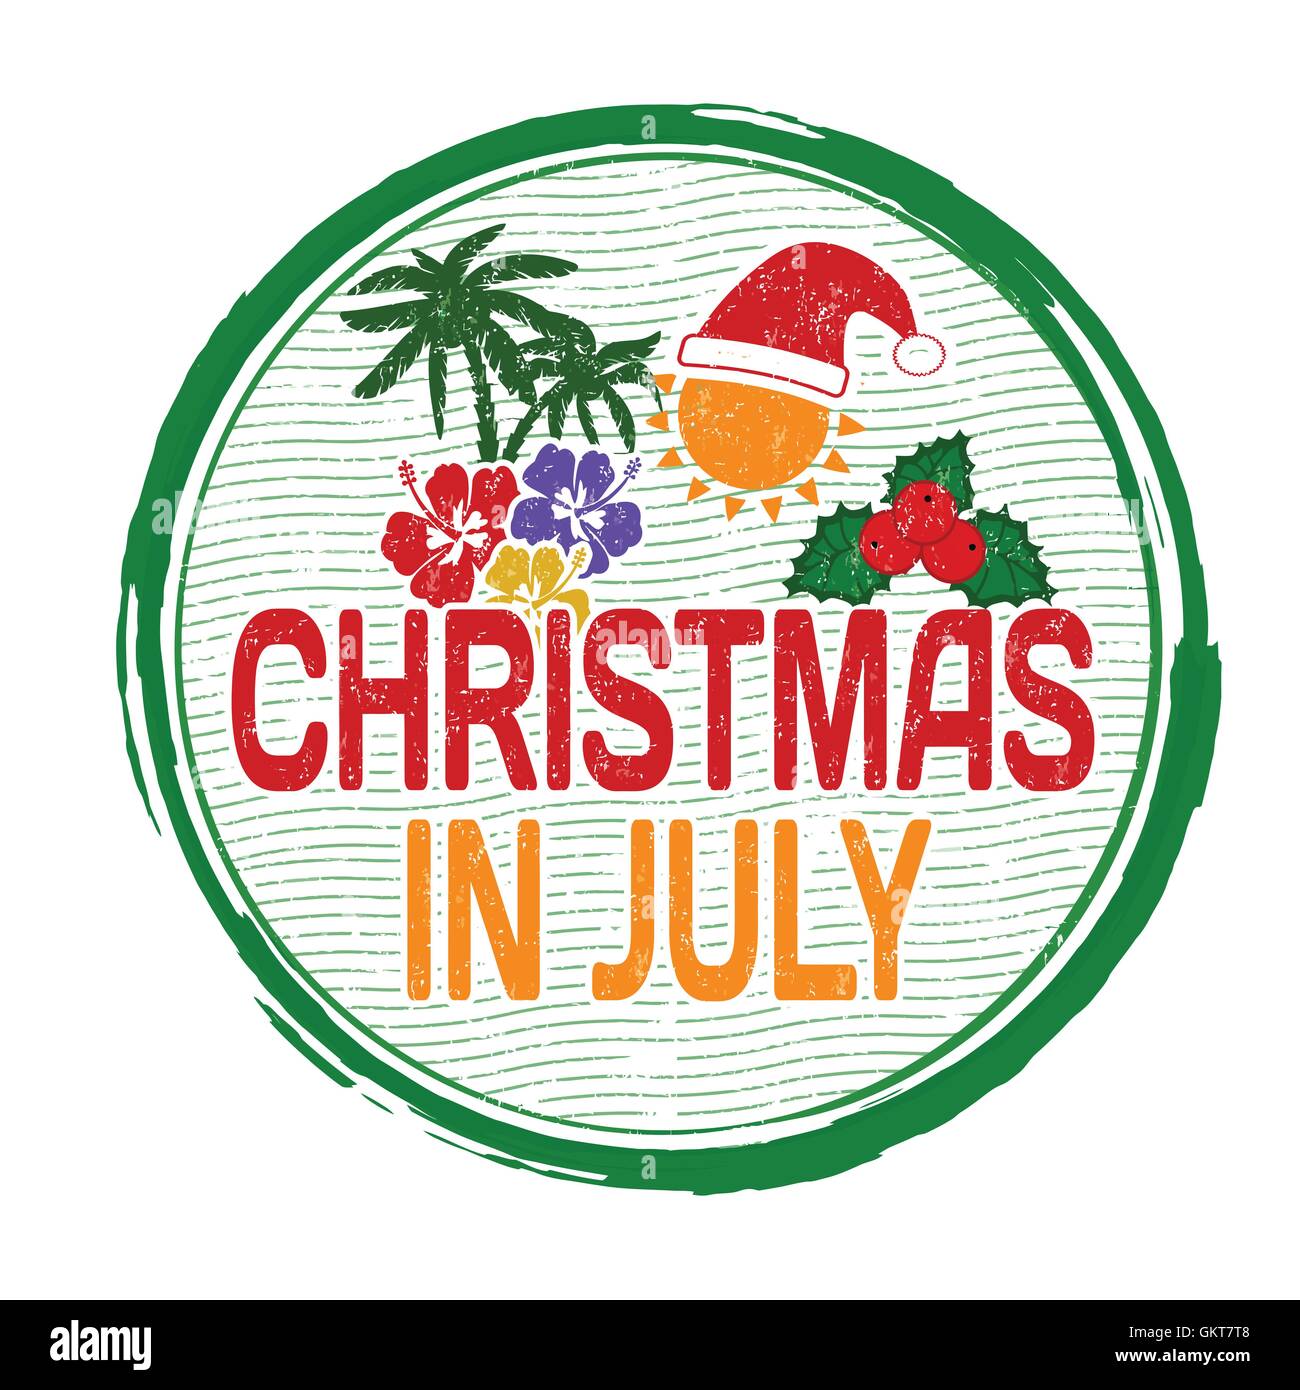 Christmas in july stamp Stock Vector